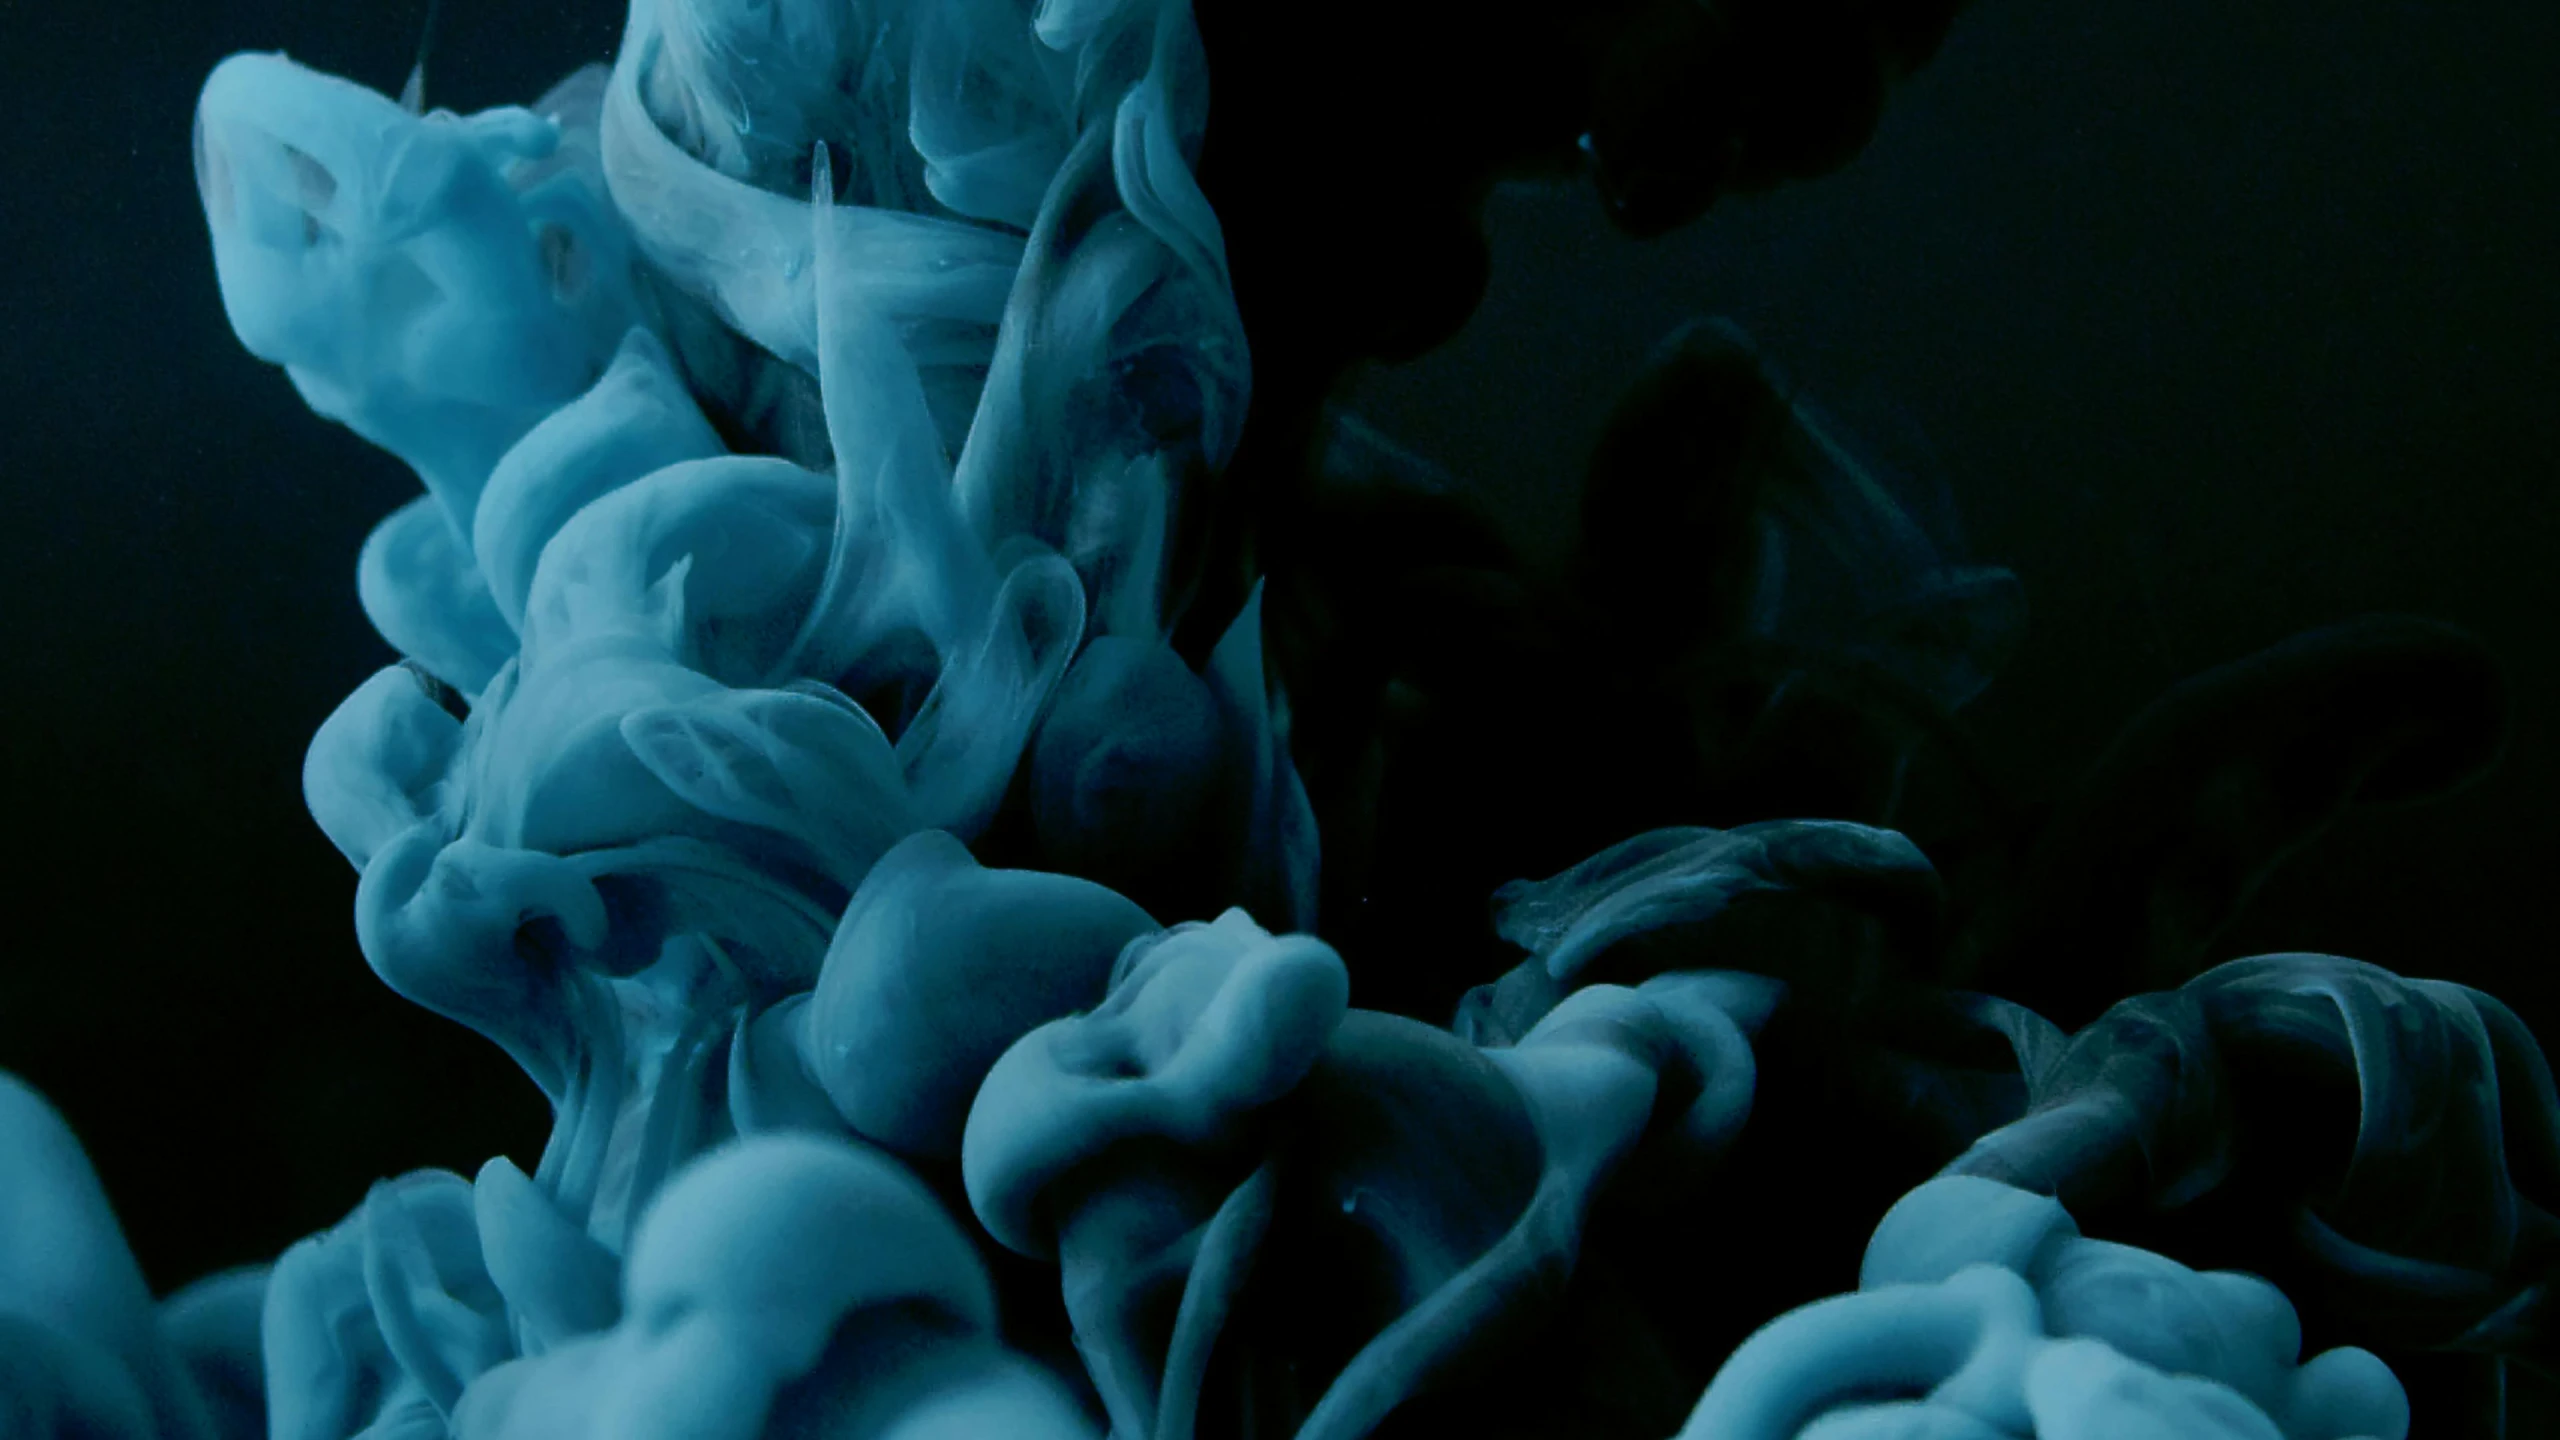 a close up of a blue substance in water, inspired by Kim Keever, unsplash contest winner, dark ink, 2 0 2 1 cinematic 4 k framegrab, photographed on colour film, stylized illustration